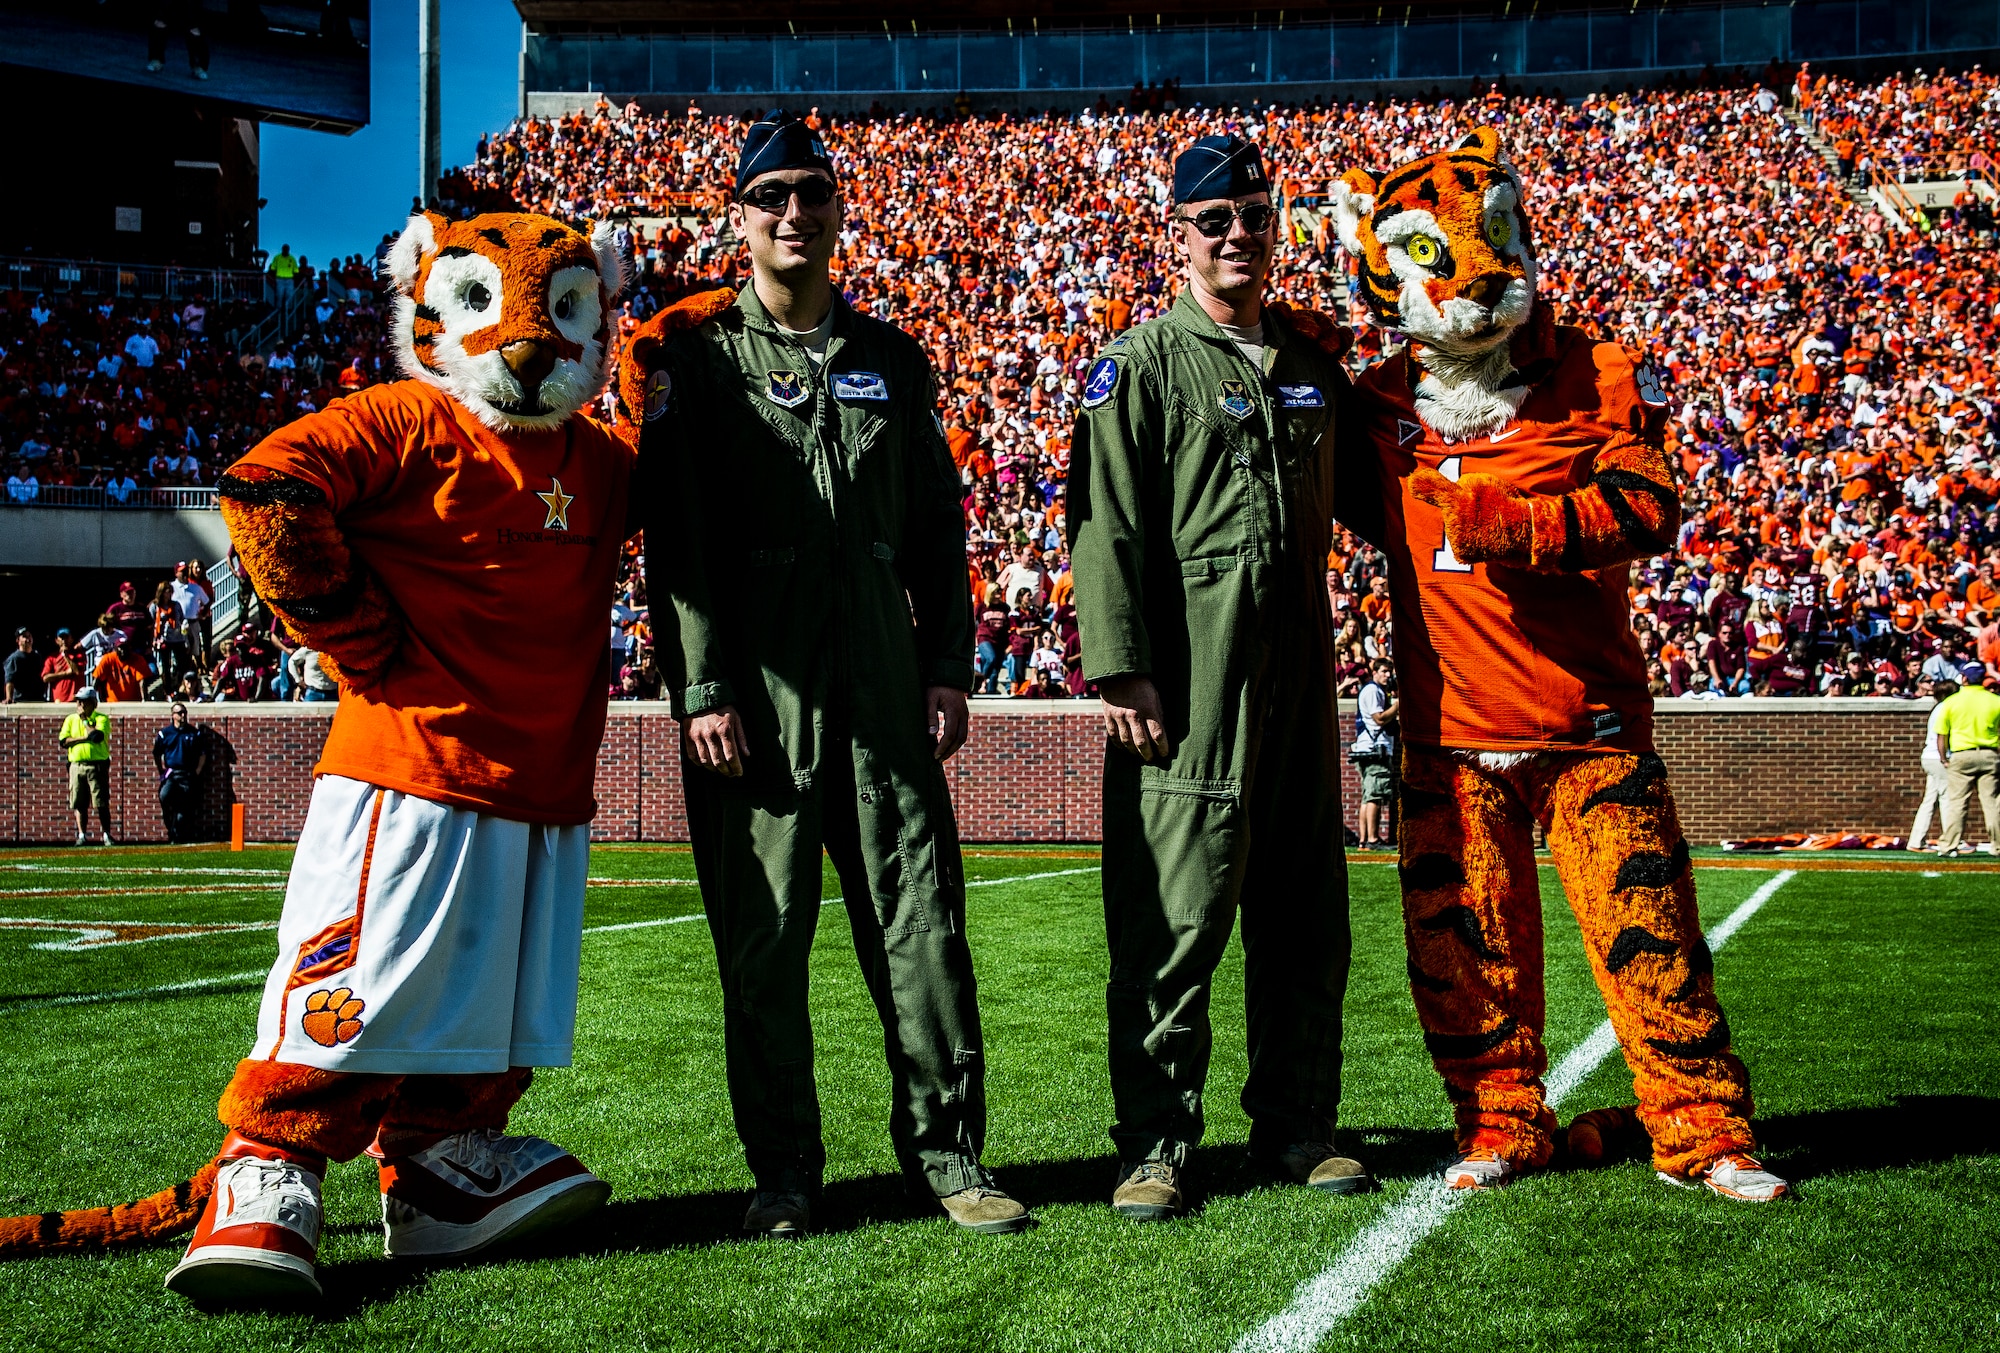 Capt. Justin Kulish (left) and Capt.  Michael Polidor (right), B-2 Bomber pilots from Whiteman Air Force Base, Mo., stand with mascots from the Clemson Tigers during a ceremony Oct. 20, 2012, at Memorial Stadium, Clemson S.C. The two pilots were recognized for their efforts providing close-air support during an insurgent ambush of Command Outpost Keating in October 2009. (U.S. Air Force photo/Senior Airman Dennis Sloan)